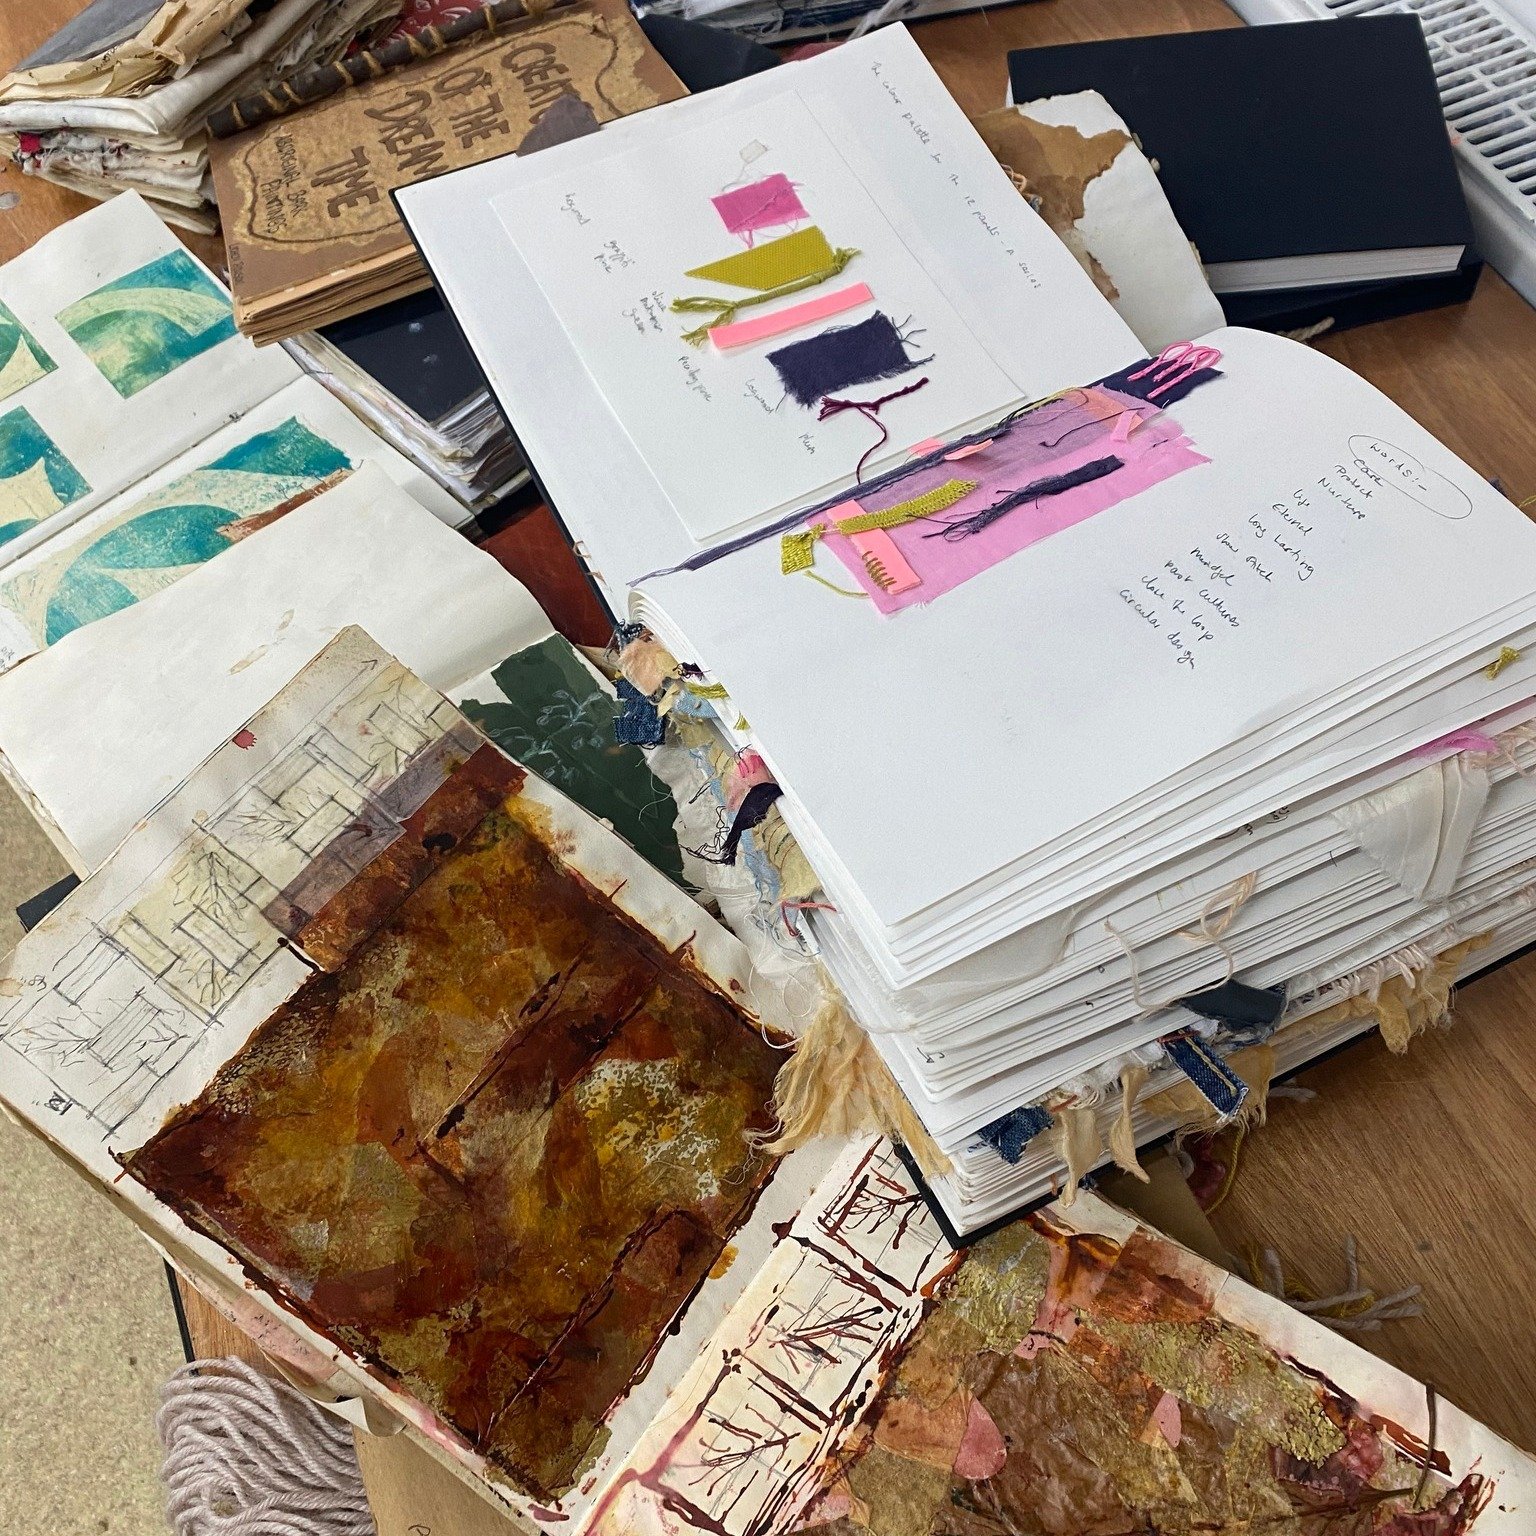 We have a couple of spaces available on this weekends Creative Sketchbooks with tutor Lichen Davenport, this sunday (19th) 10am - 4pm, its a great class a really lovely chance to learn how to make a simple sketchbook then spend the day filling it up 